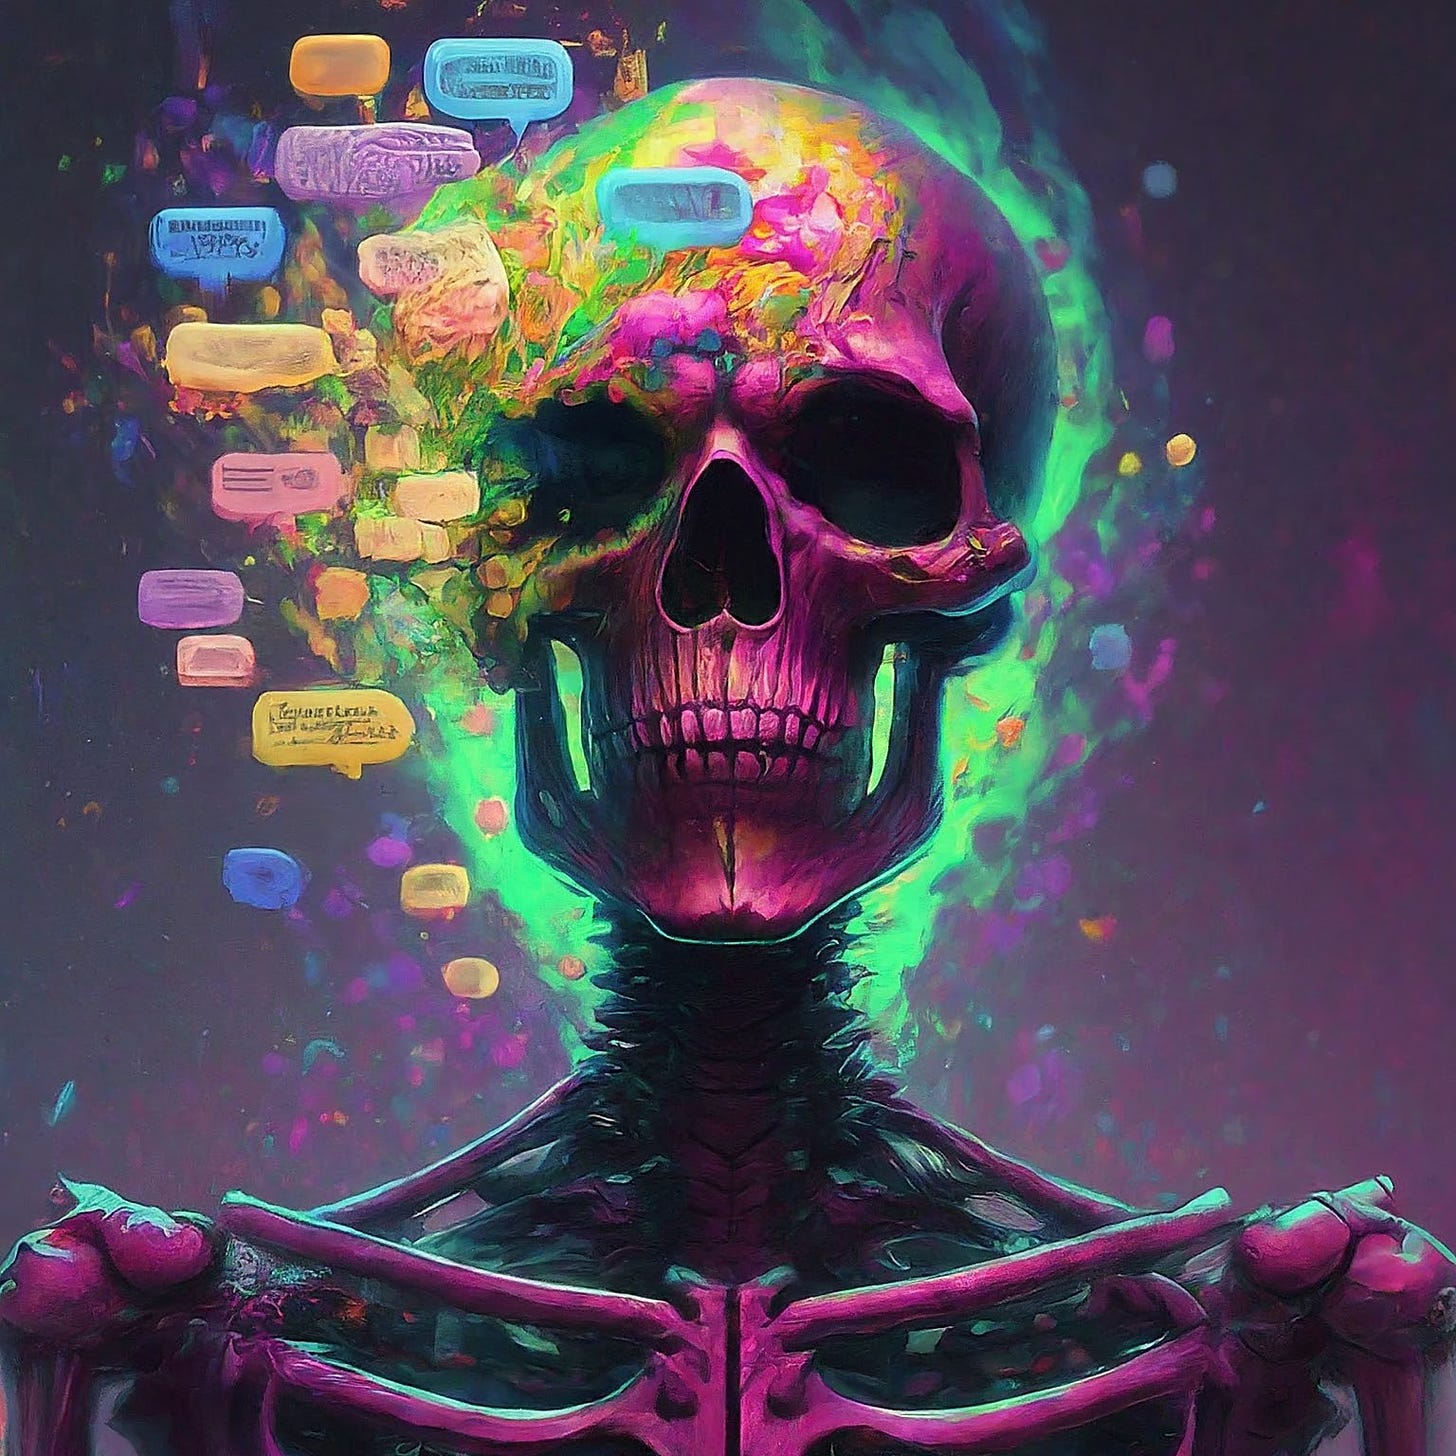 Purple neon skeleton with colorful text blurbs around its head. Green ethereal light in the background.